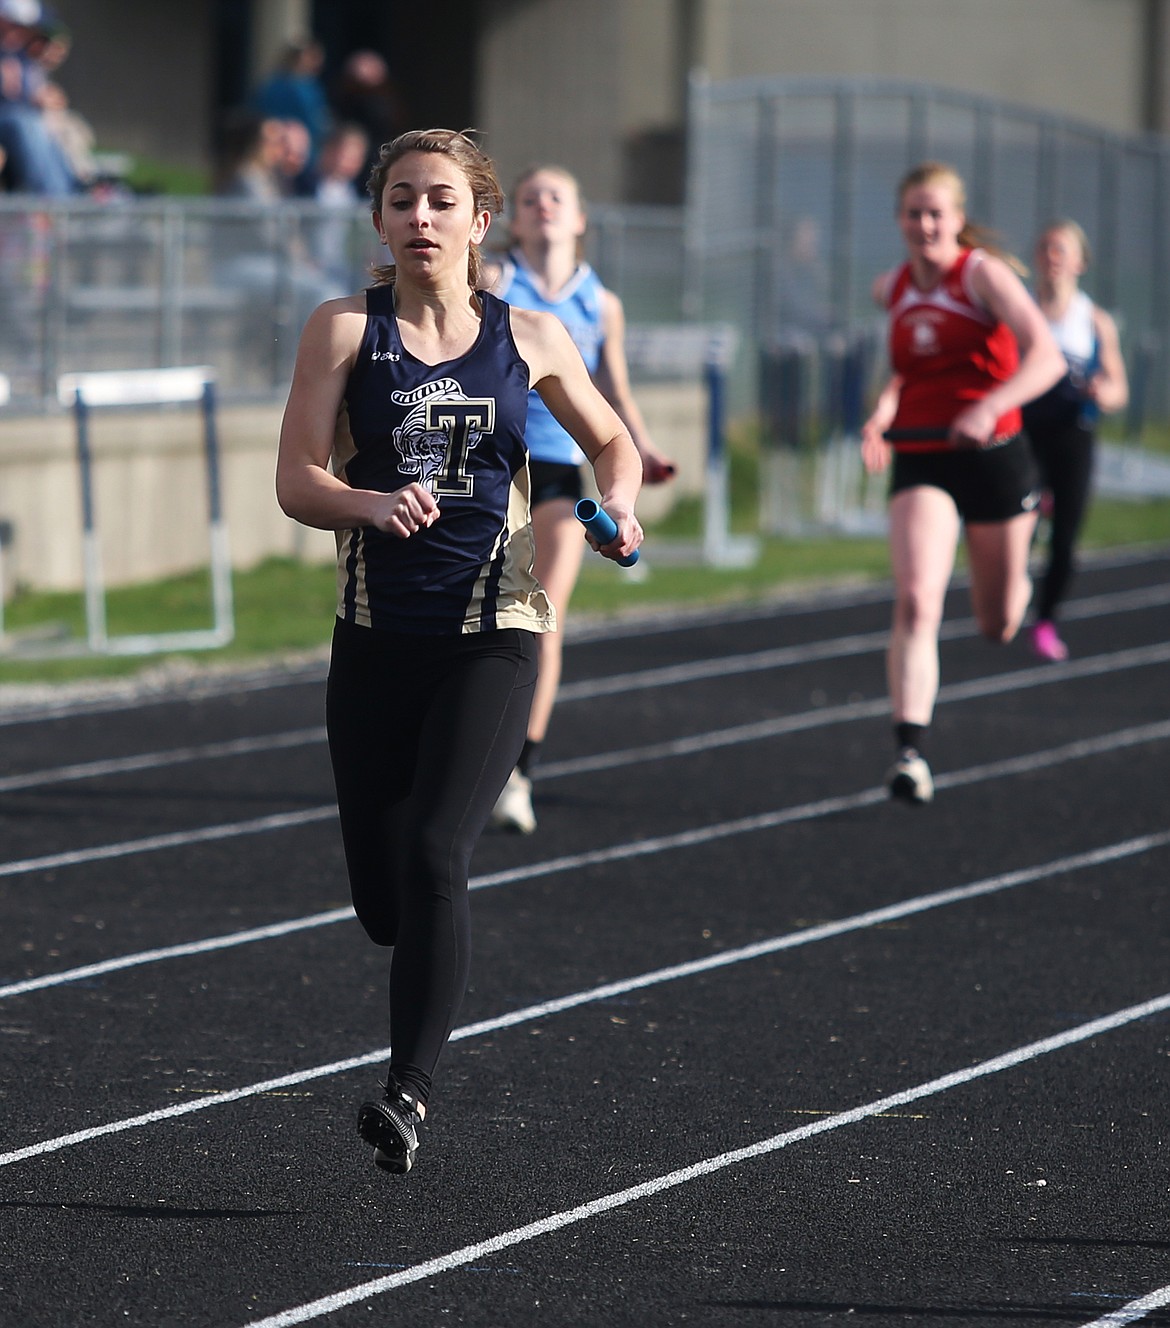 Timberlake High&#146;s Jeana Craven approaches the finish line in the 4x200-meter relay at the Timberlake Invitational.